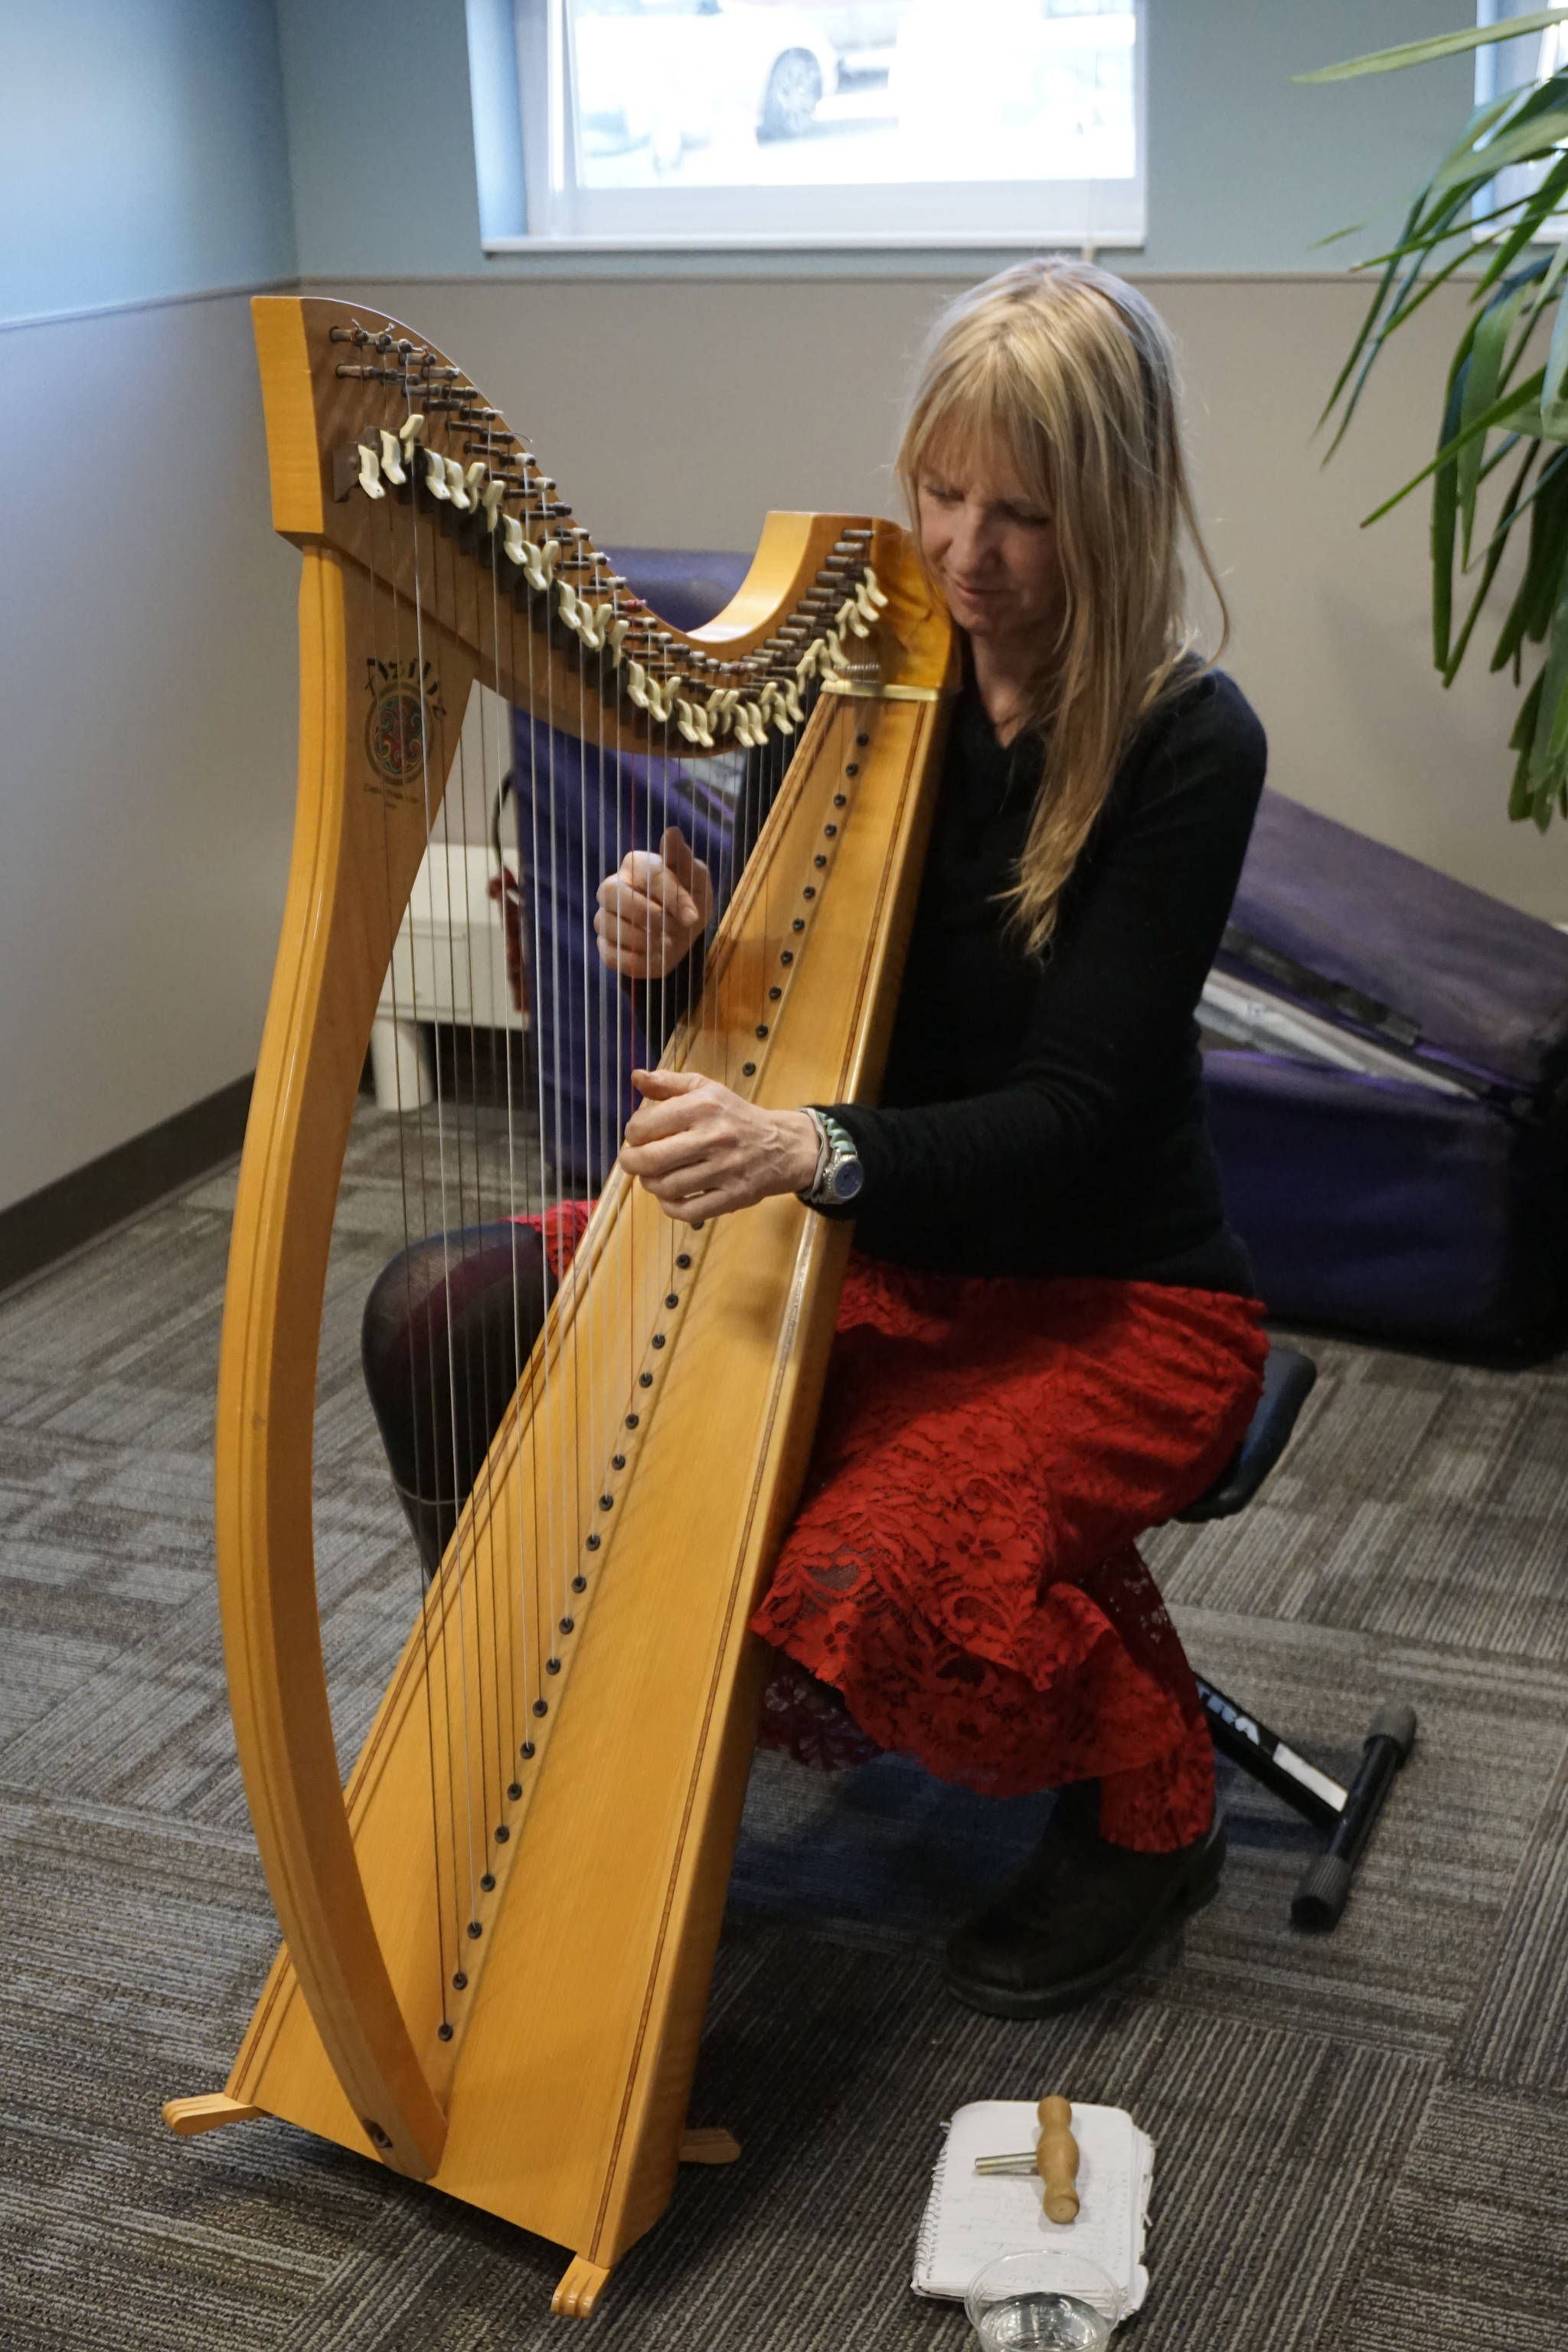 Michelle Morton plays the harp at an open house for the expanded and remodeled clinic last Friday, March 30, 2018 on Bartlett Street in Homer, Alaska. (Photo by Michael Armstrong, Homer News)